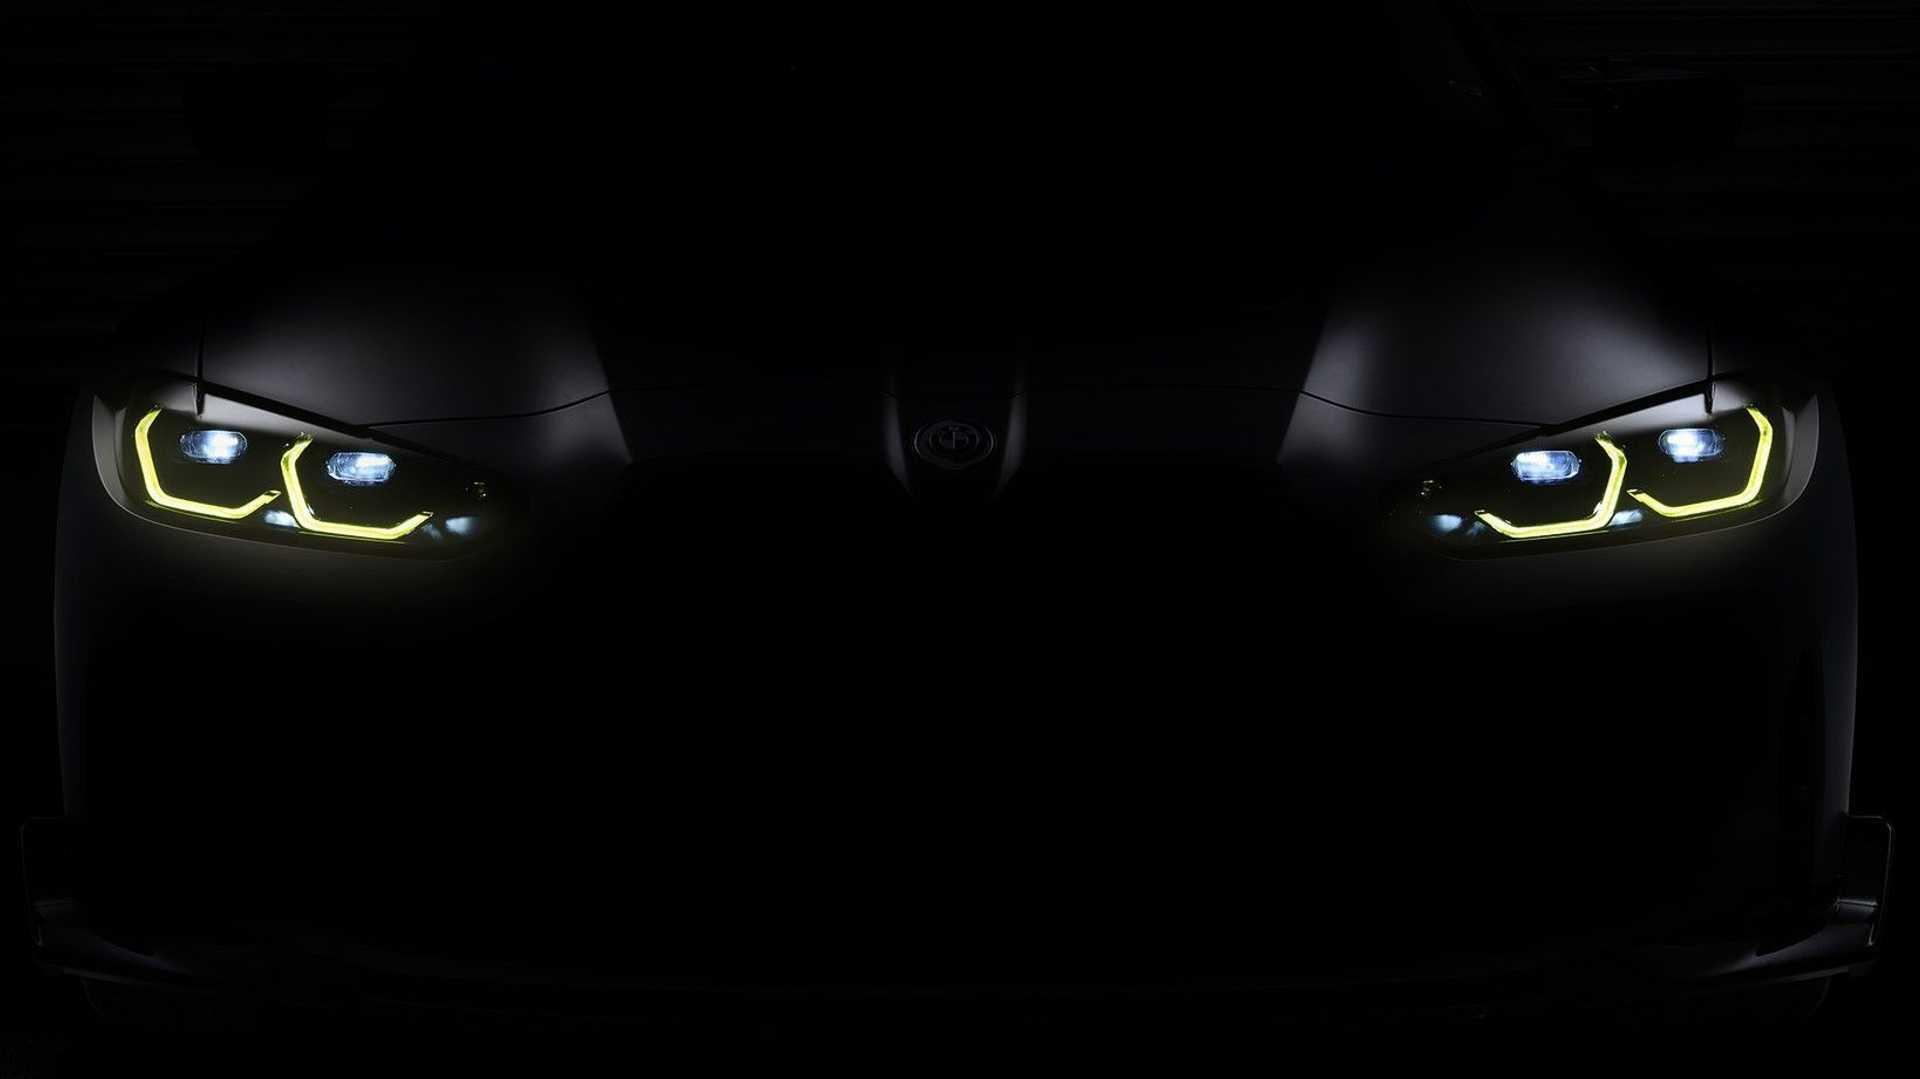 Bmw M4 Csl Teaser Image Arrive Ahead Of May Debut